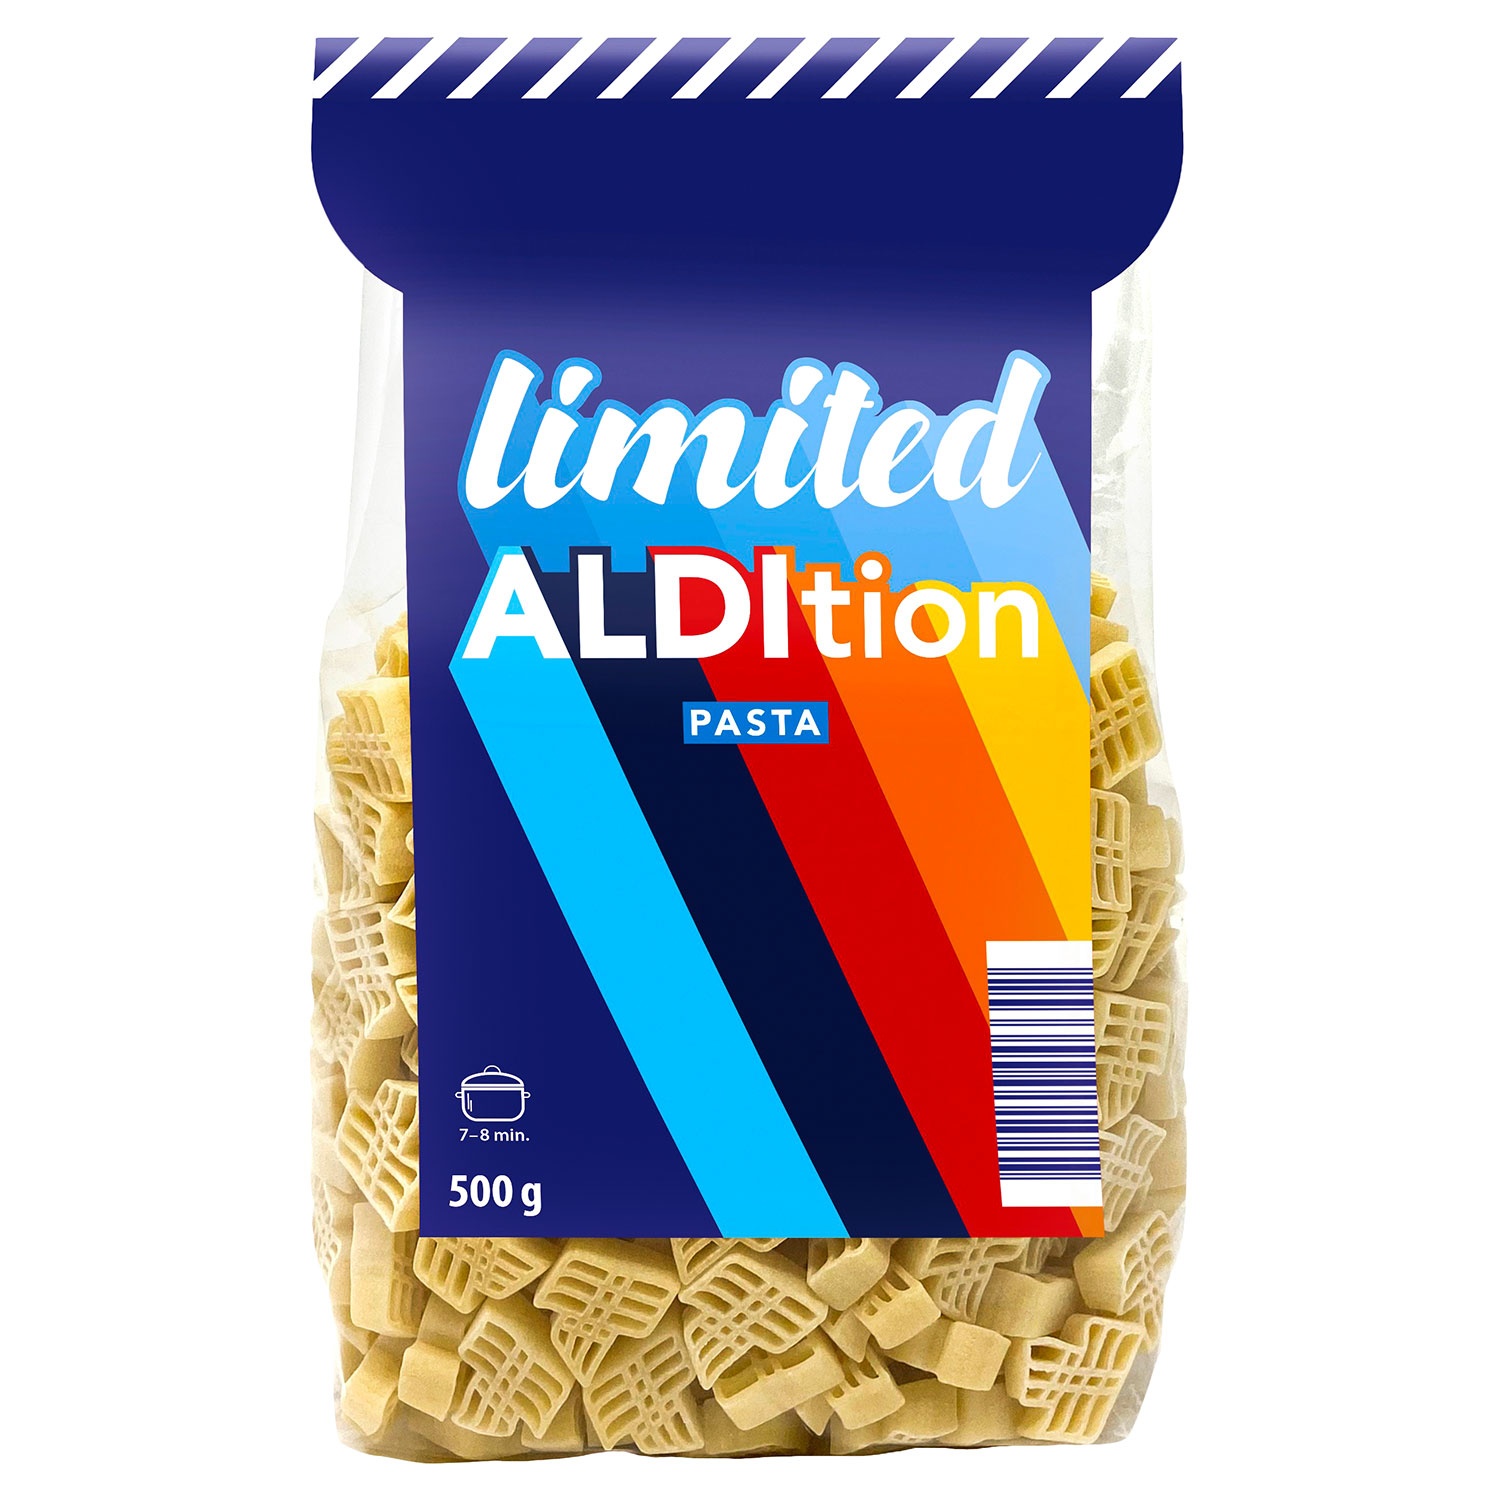 LIMITED ALDITION Pasta 500 g